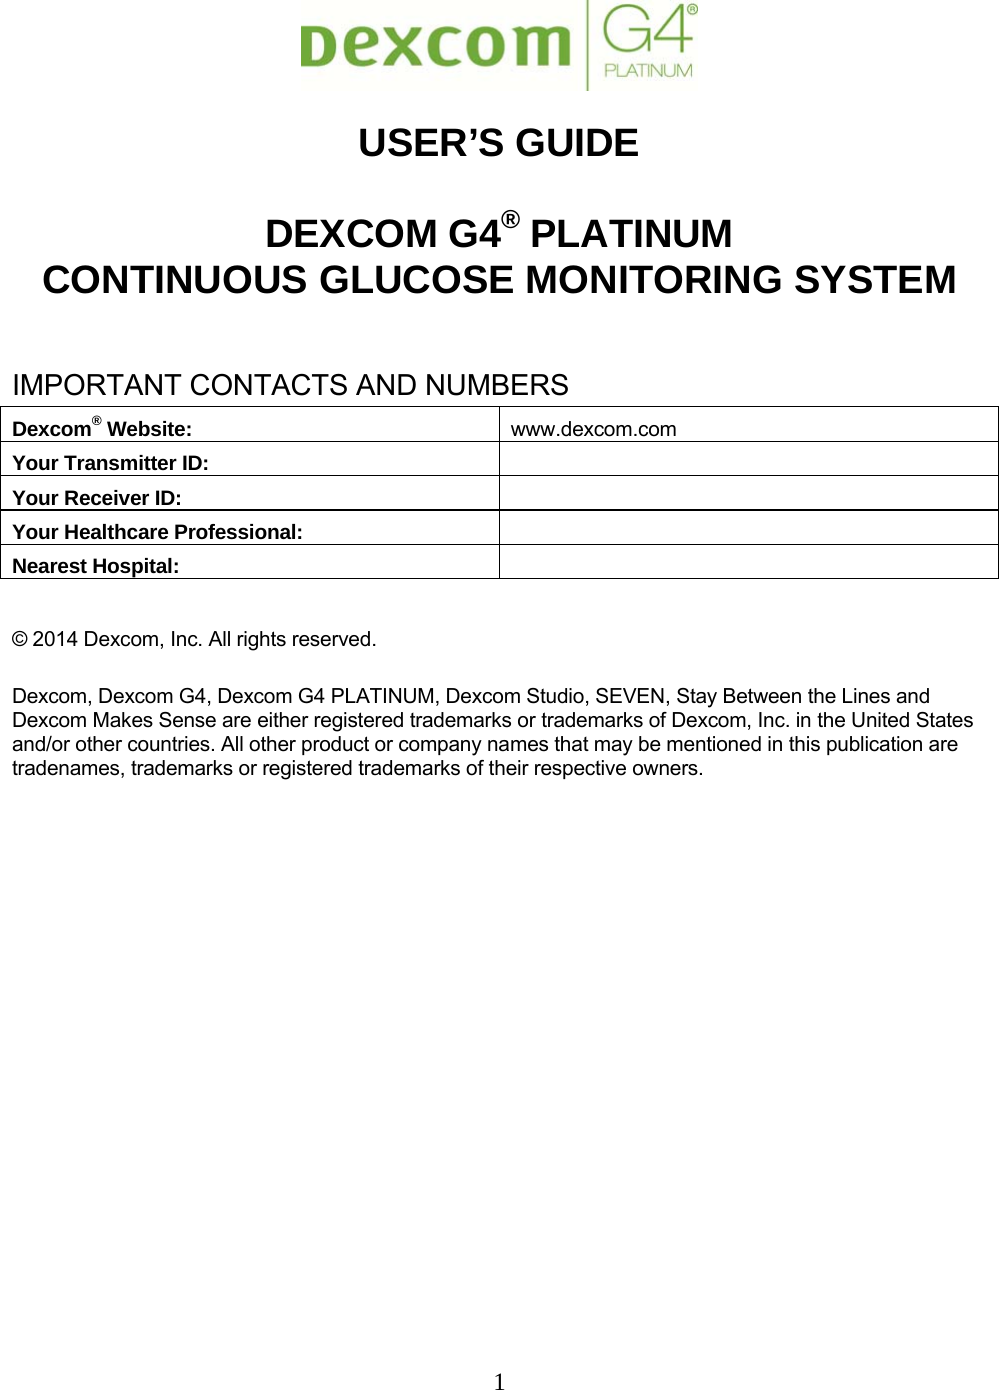 1    USER’S GUIDE  DEXCOM G4® PLATINUM CONTINUOUS GLUCOSE MONITORING SYSTEM  IMPORTANT CONTACTS AND NUMBERS Dexcom® Website:  www.dexcom.com Your Transmitter ID:  Your Receiver ID:  Your Healthcare Professional:  Nearest Hospital:   © 2014 Dexcom, Inc. All rights reserved.  Dexcom, Dexcom G4, Dexcom G4 PLATINUM, Dexcom Studio, SEVEN, Stay Between the Lines and Dexcom Makes Sense are either registered trademarks or trademarks of Dexcom, Inc. in the United States and/or other countries. All other product or company names that may be mentioned in this publication are tradenames, trademarks or registered trademarks of their respective owners.     